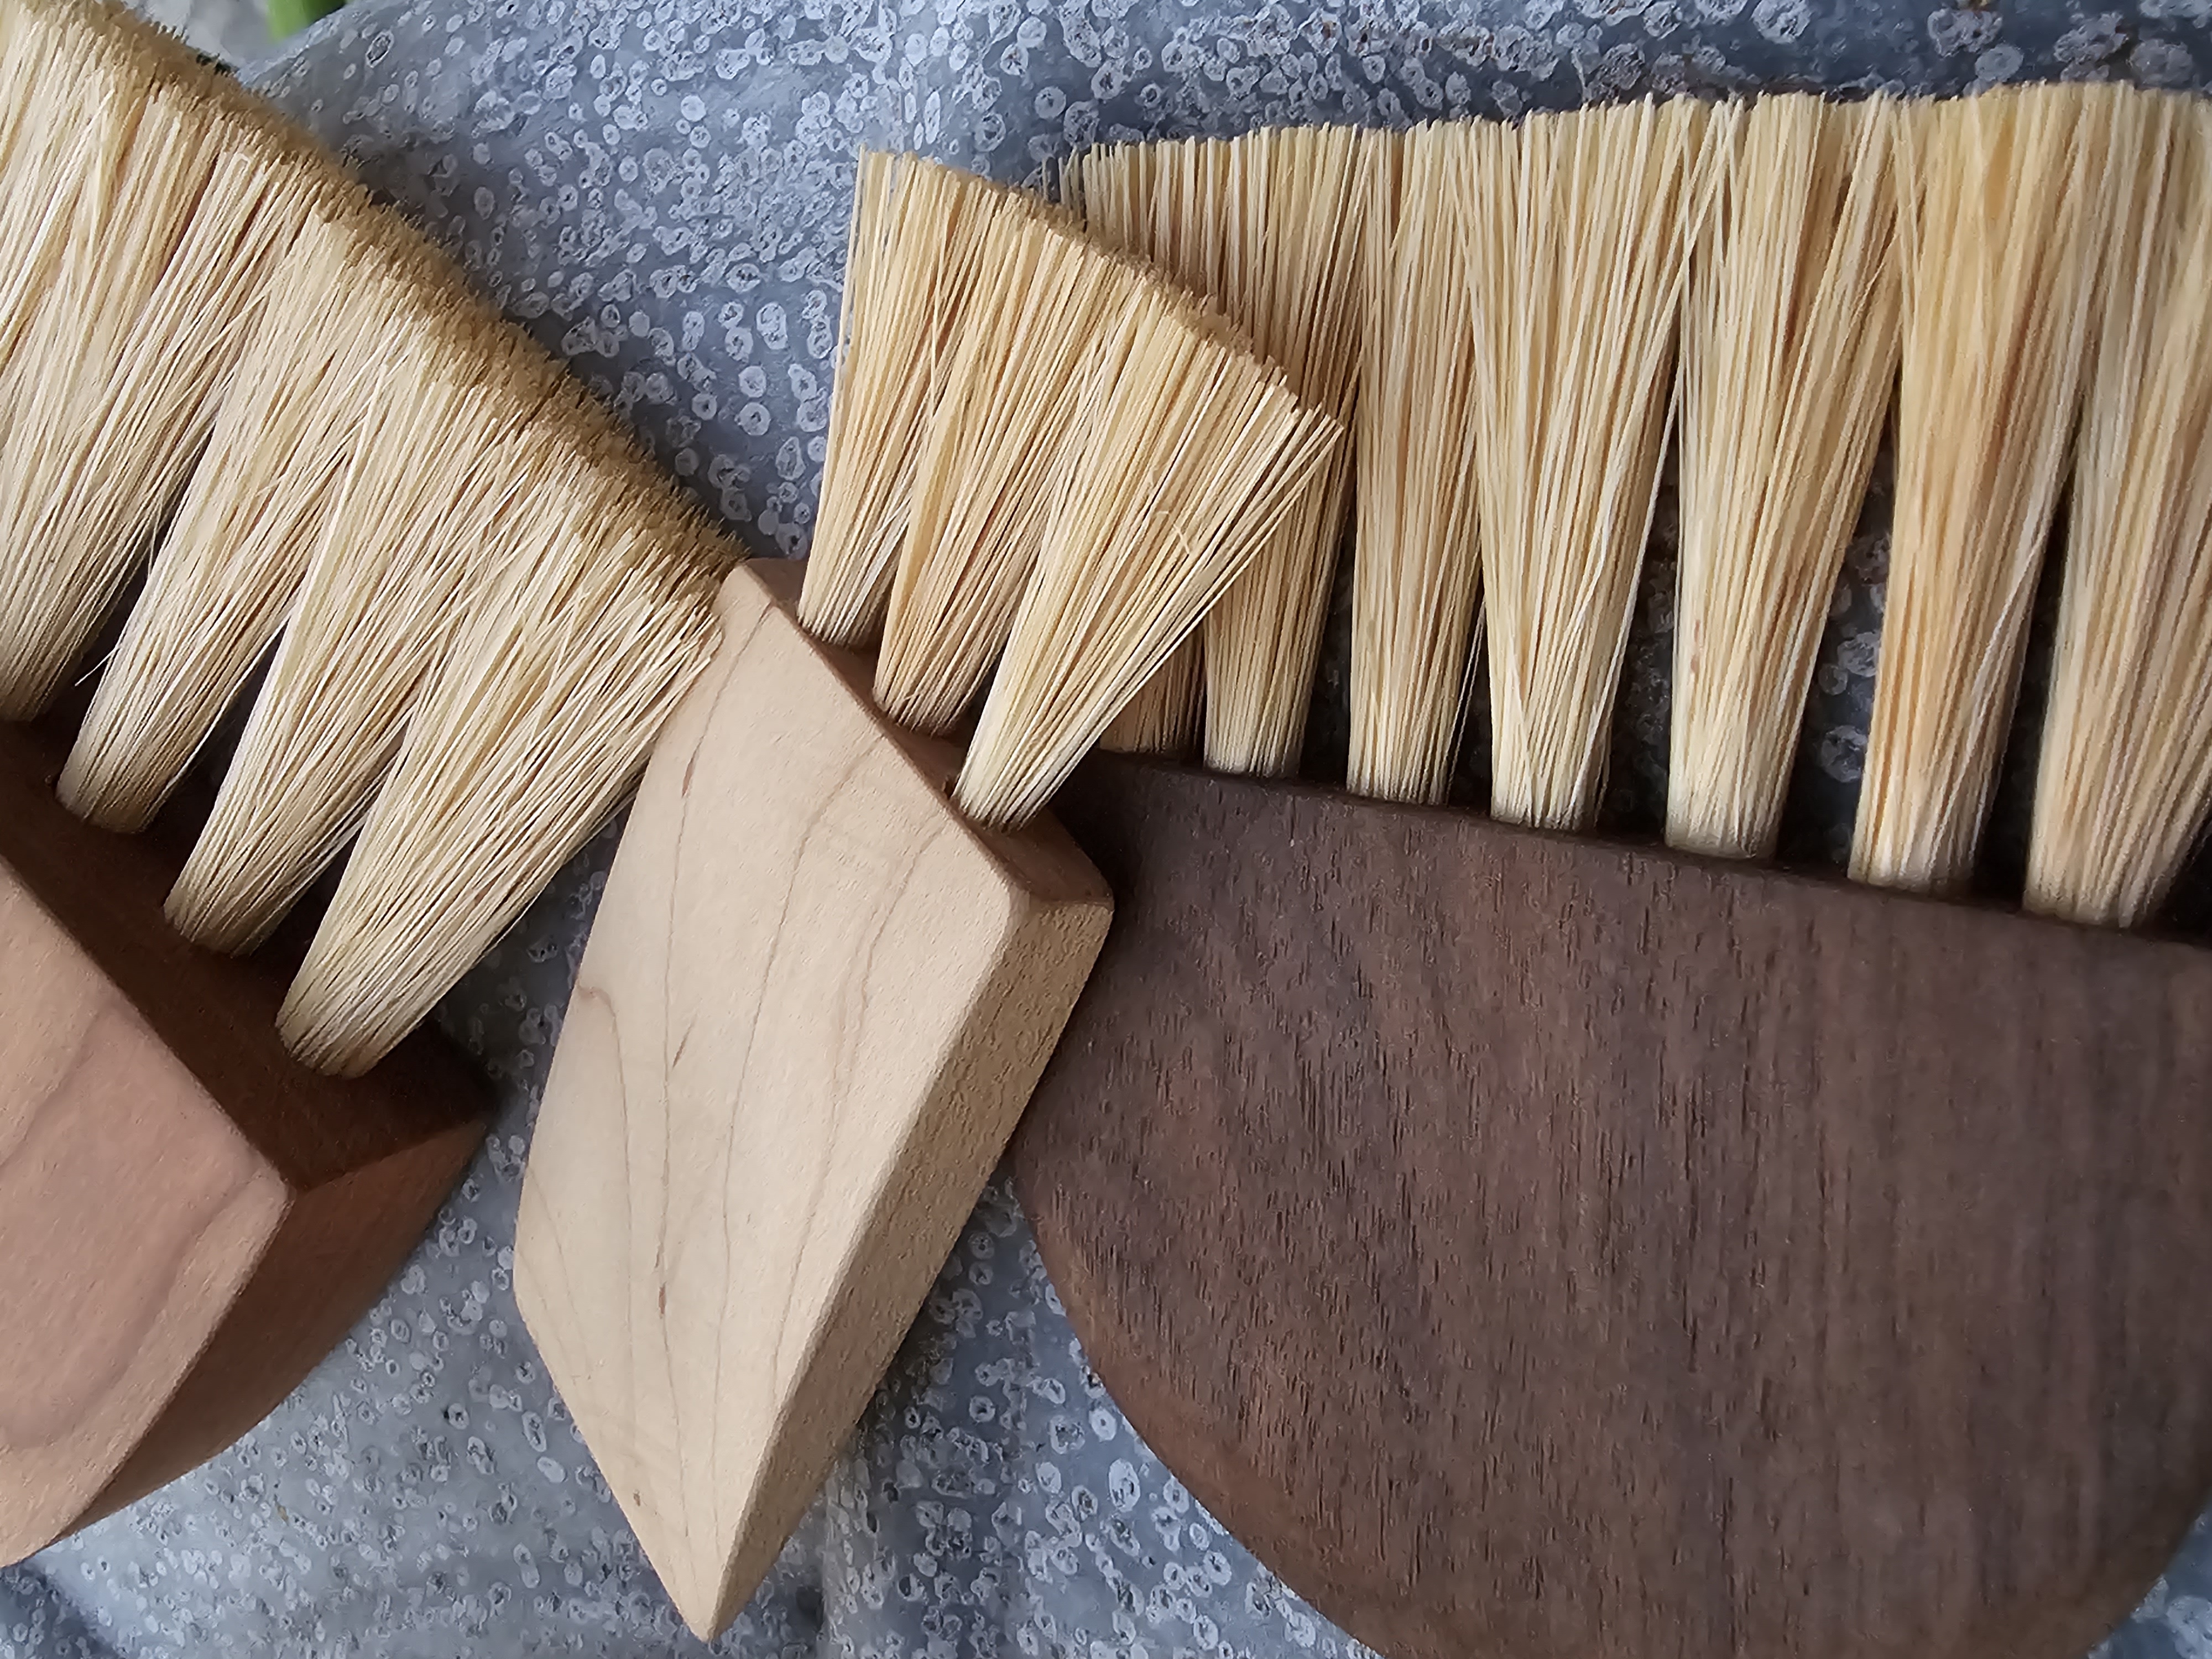 close up of handmade wooden handled small brushes on metal surface